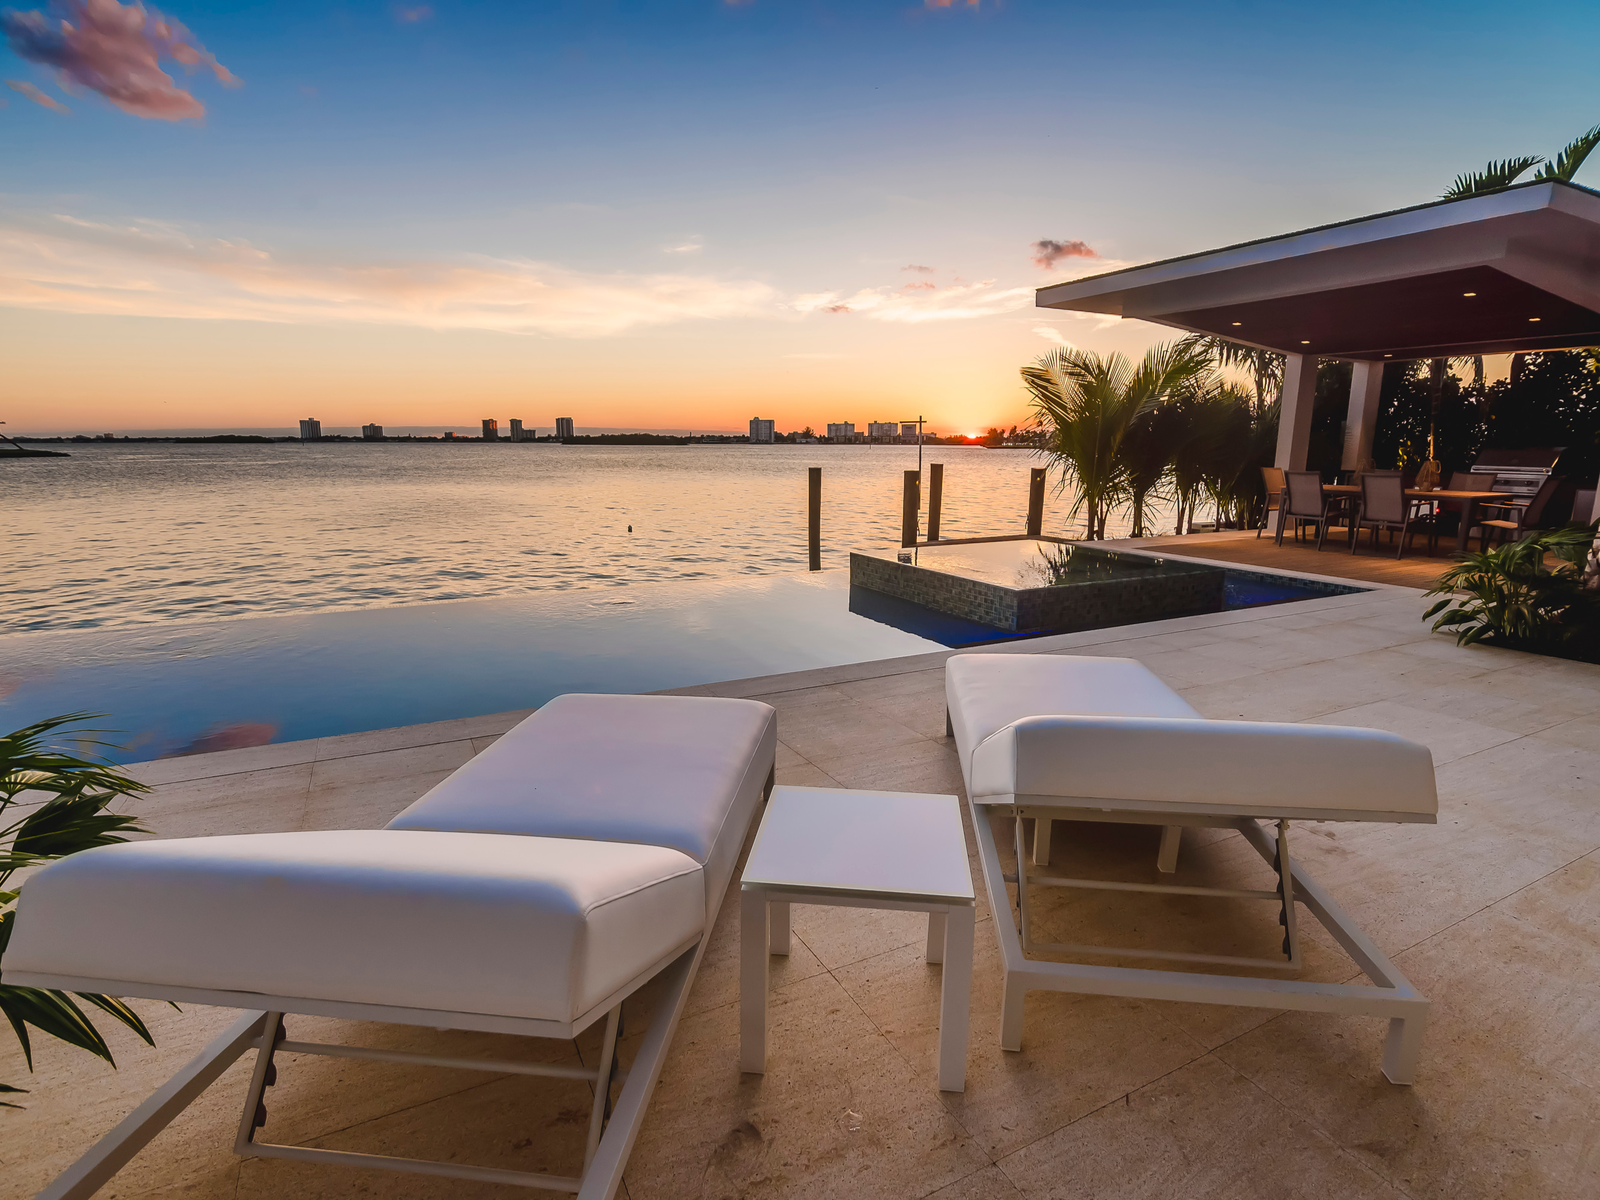 Beautiful sunset over the Miami bay viewed from empty sun loungers and infinity pool in one of the best all-inclusive resorts in the U.S.